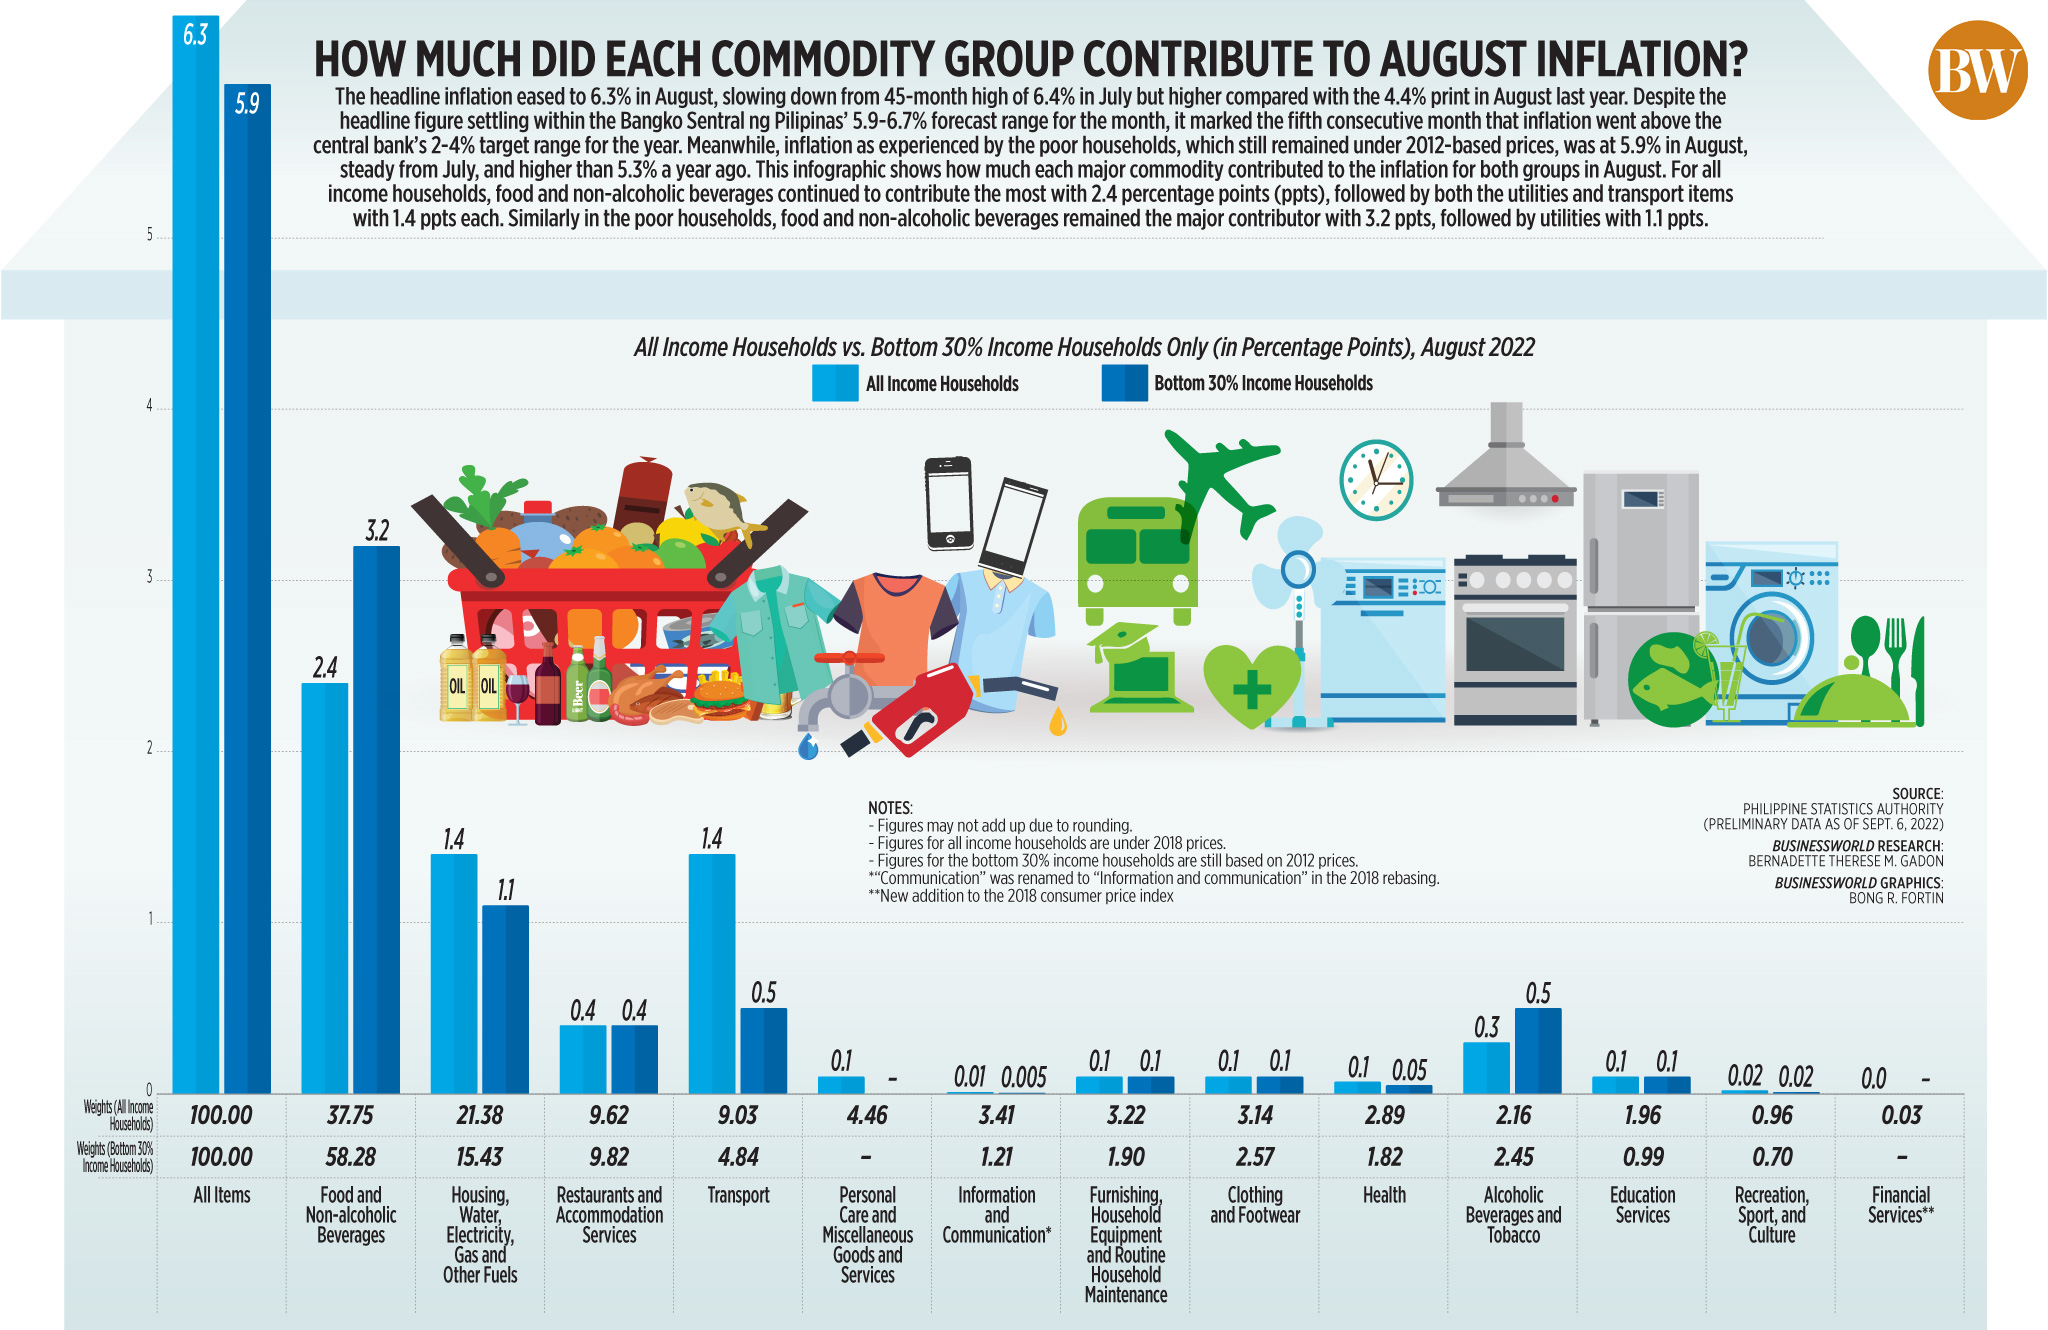 How much did each commodity group contribute to August inflation?